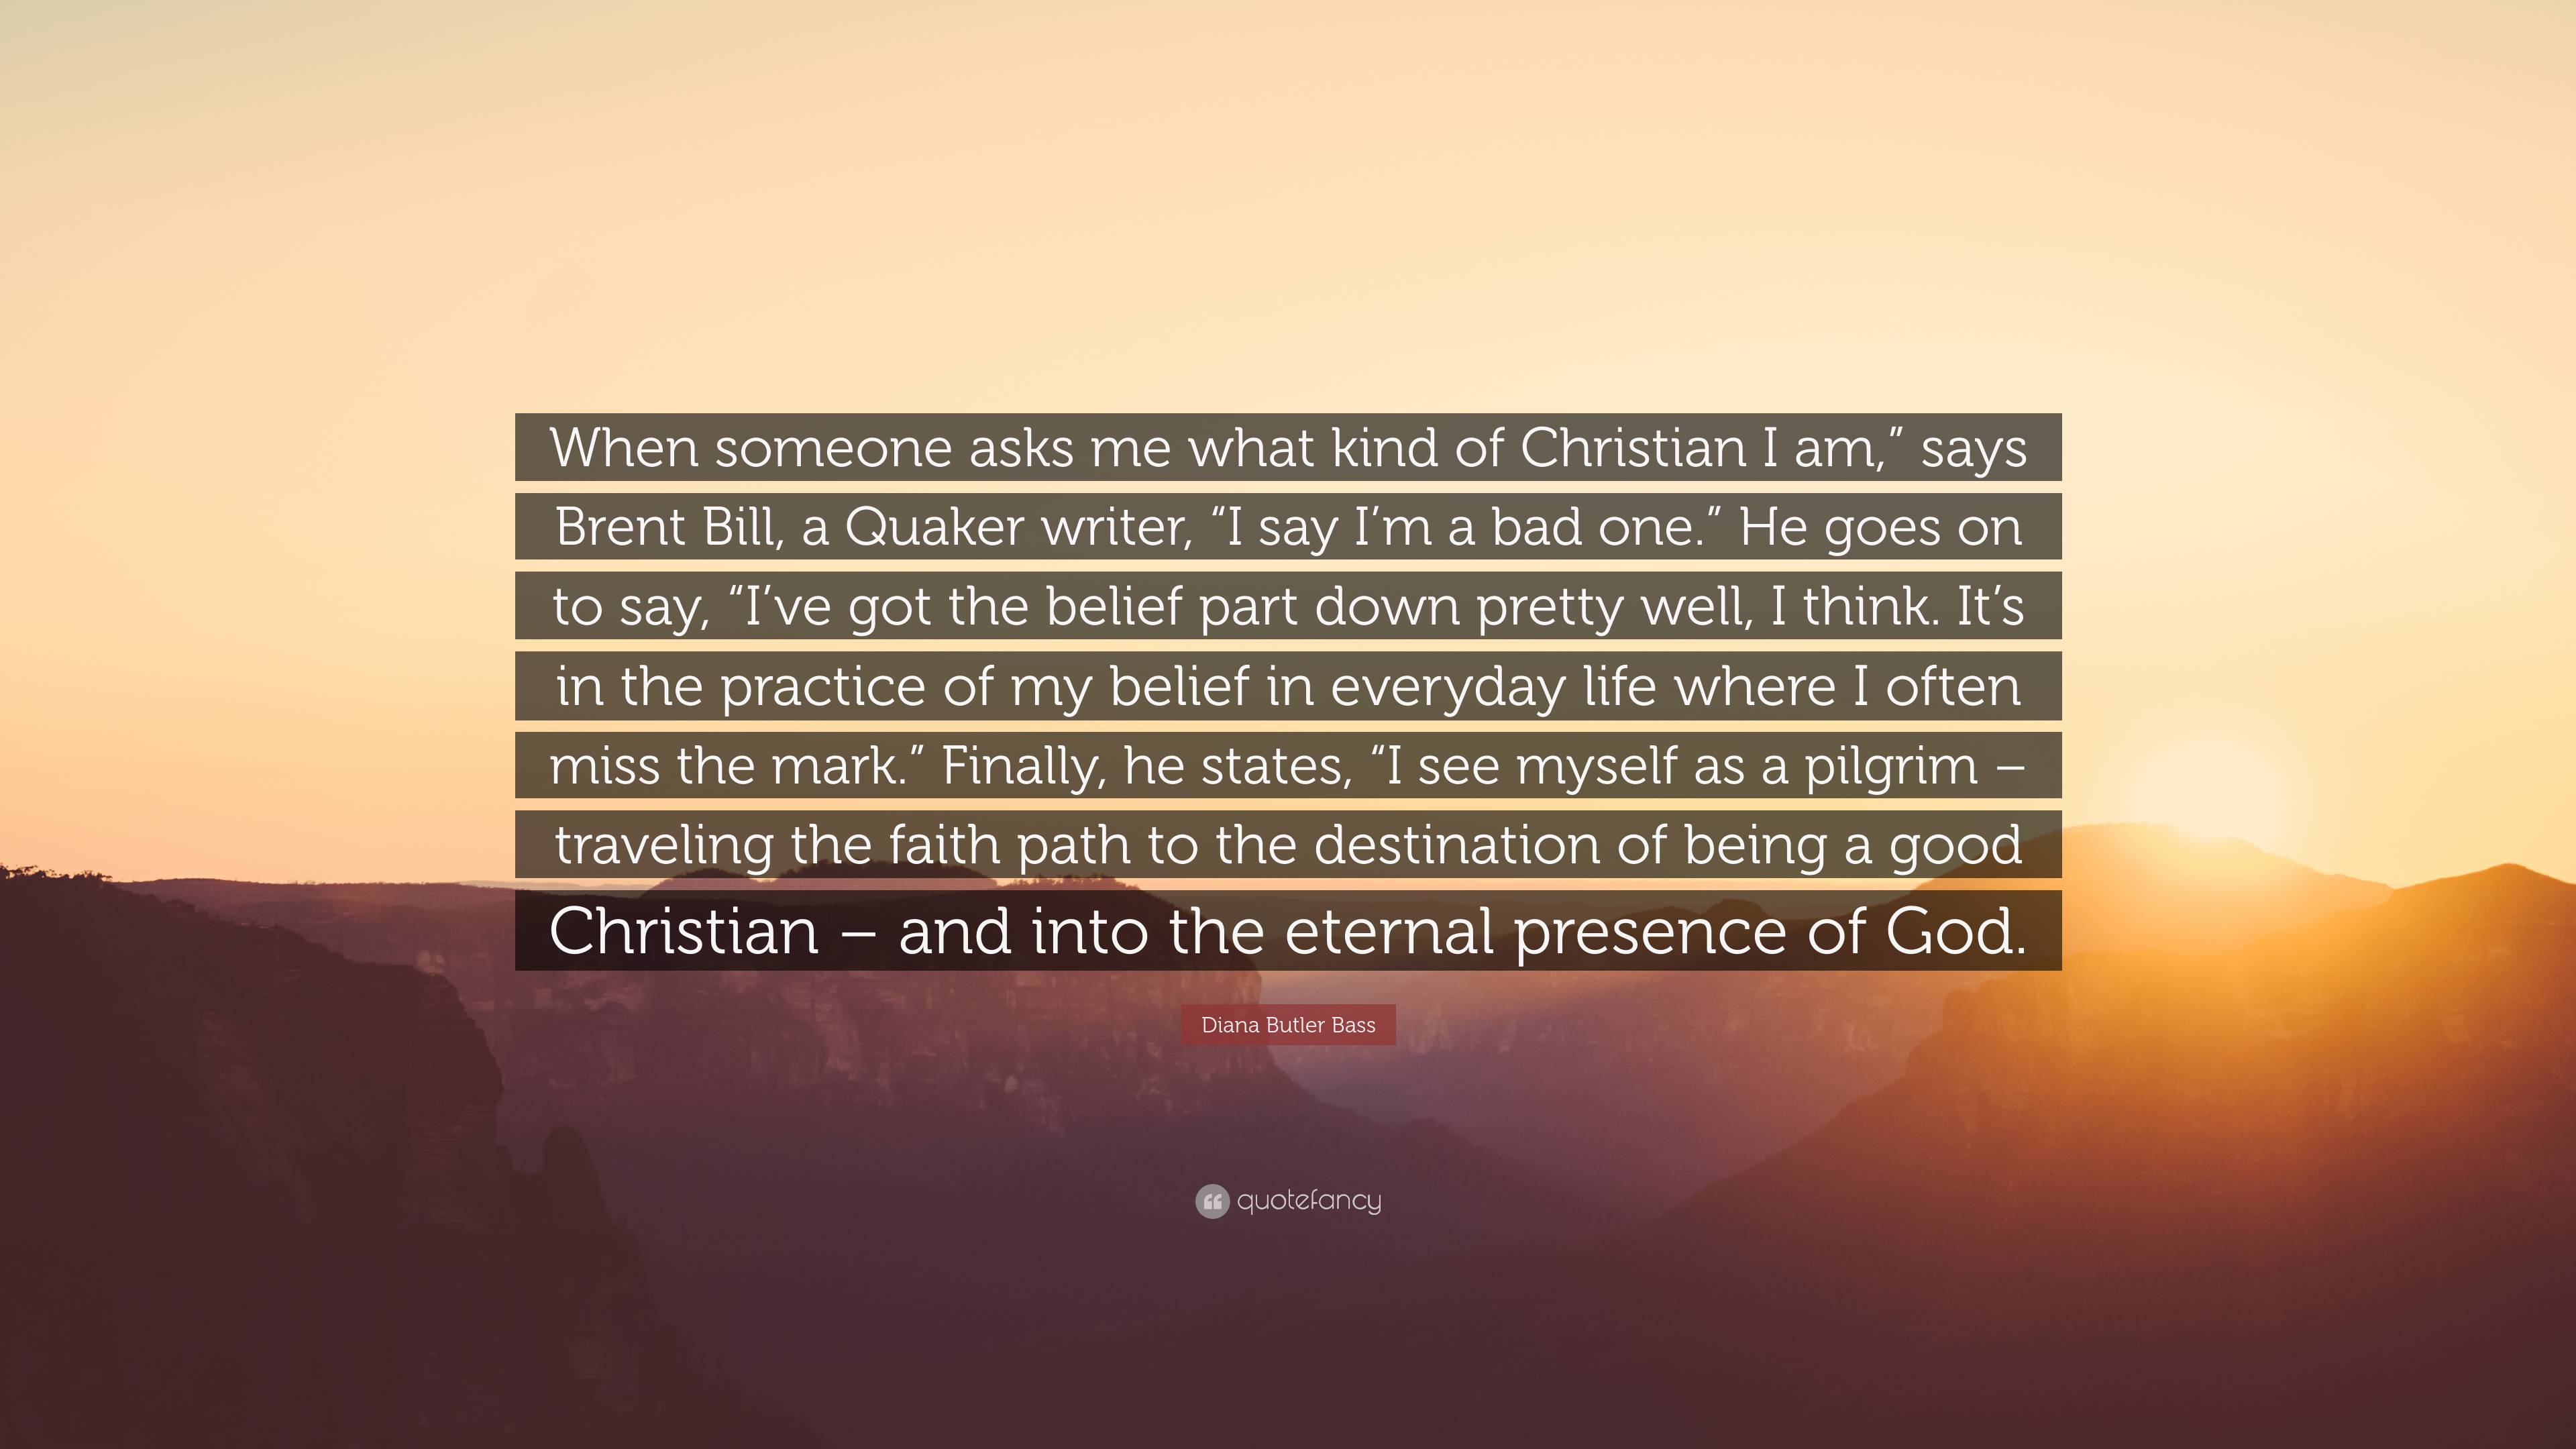 Diana Butler Bass Quote “When someone asks me what kind of Christian I